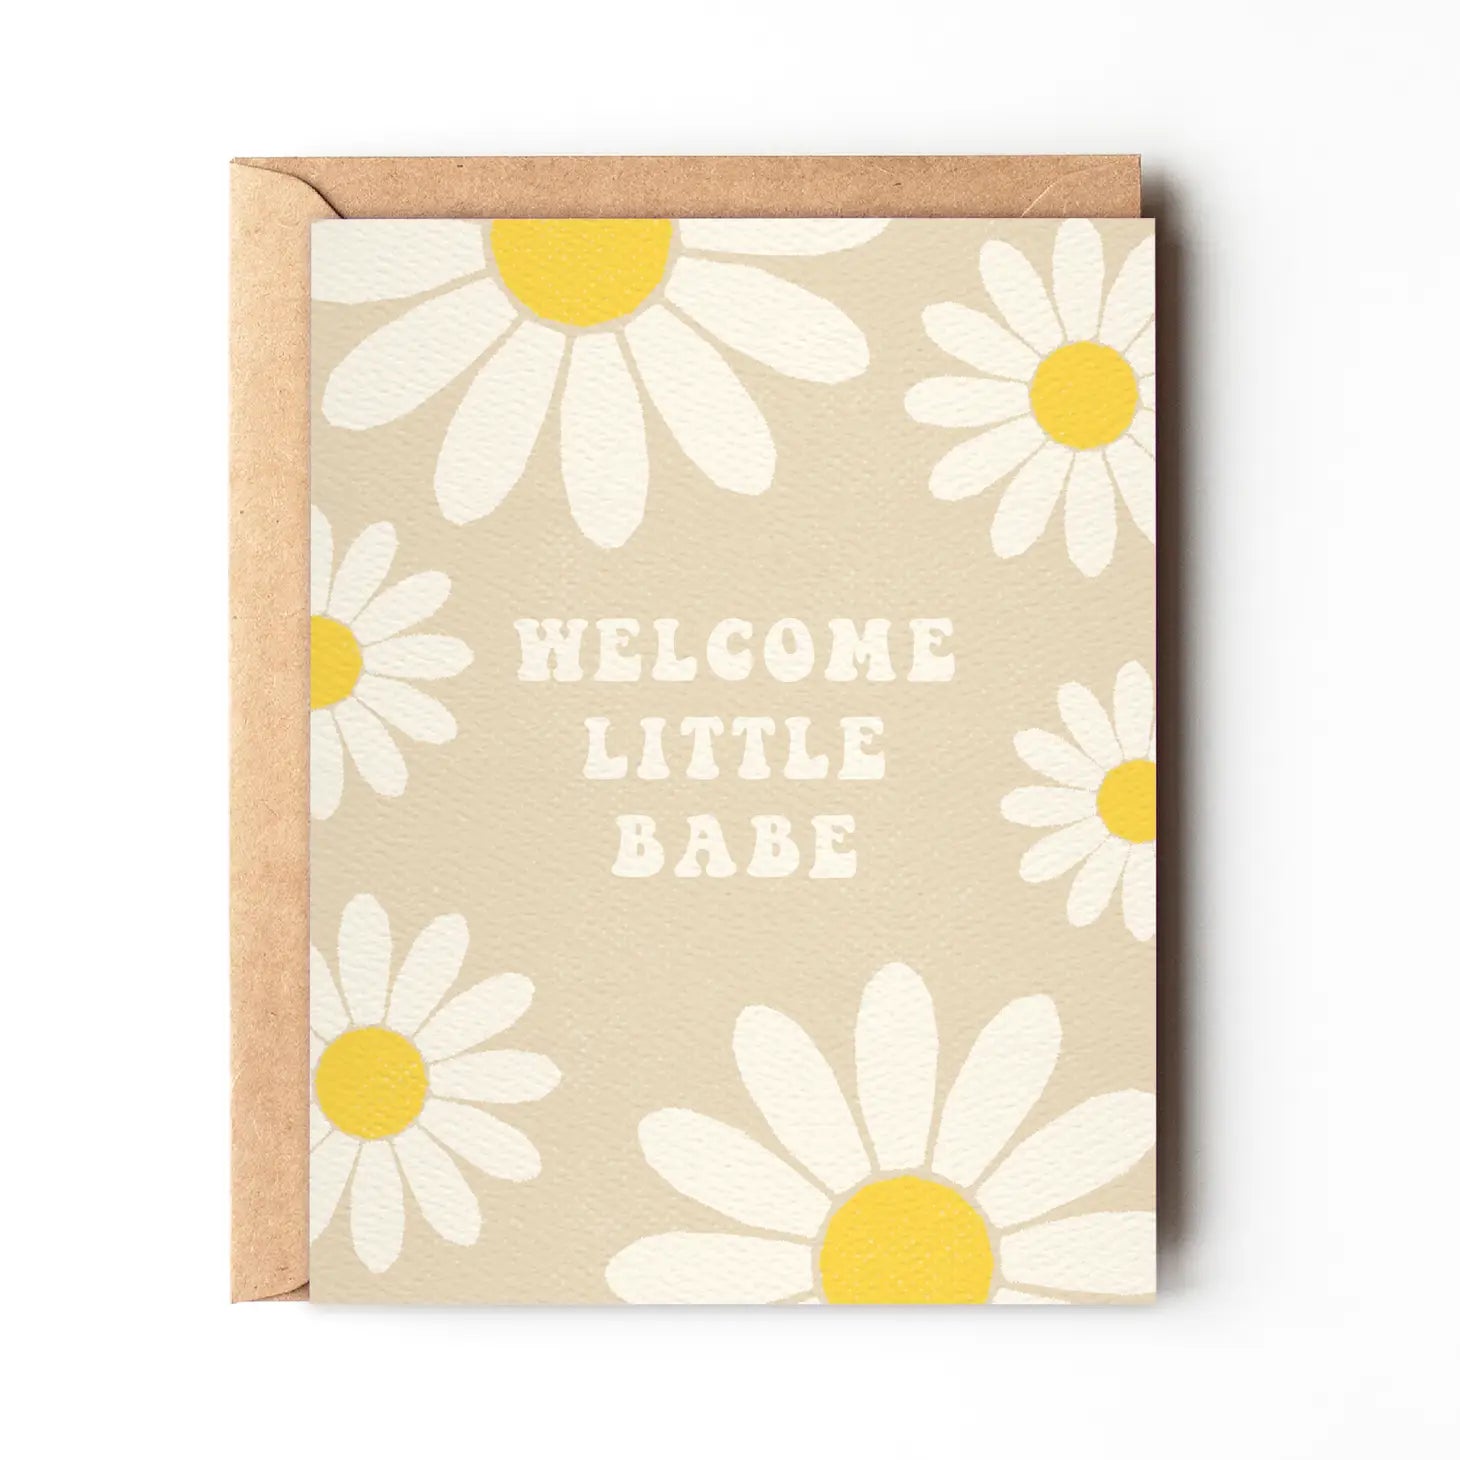 Welcome Little Babe - Greeting Card